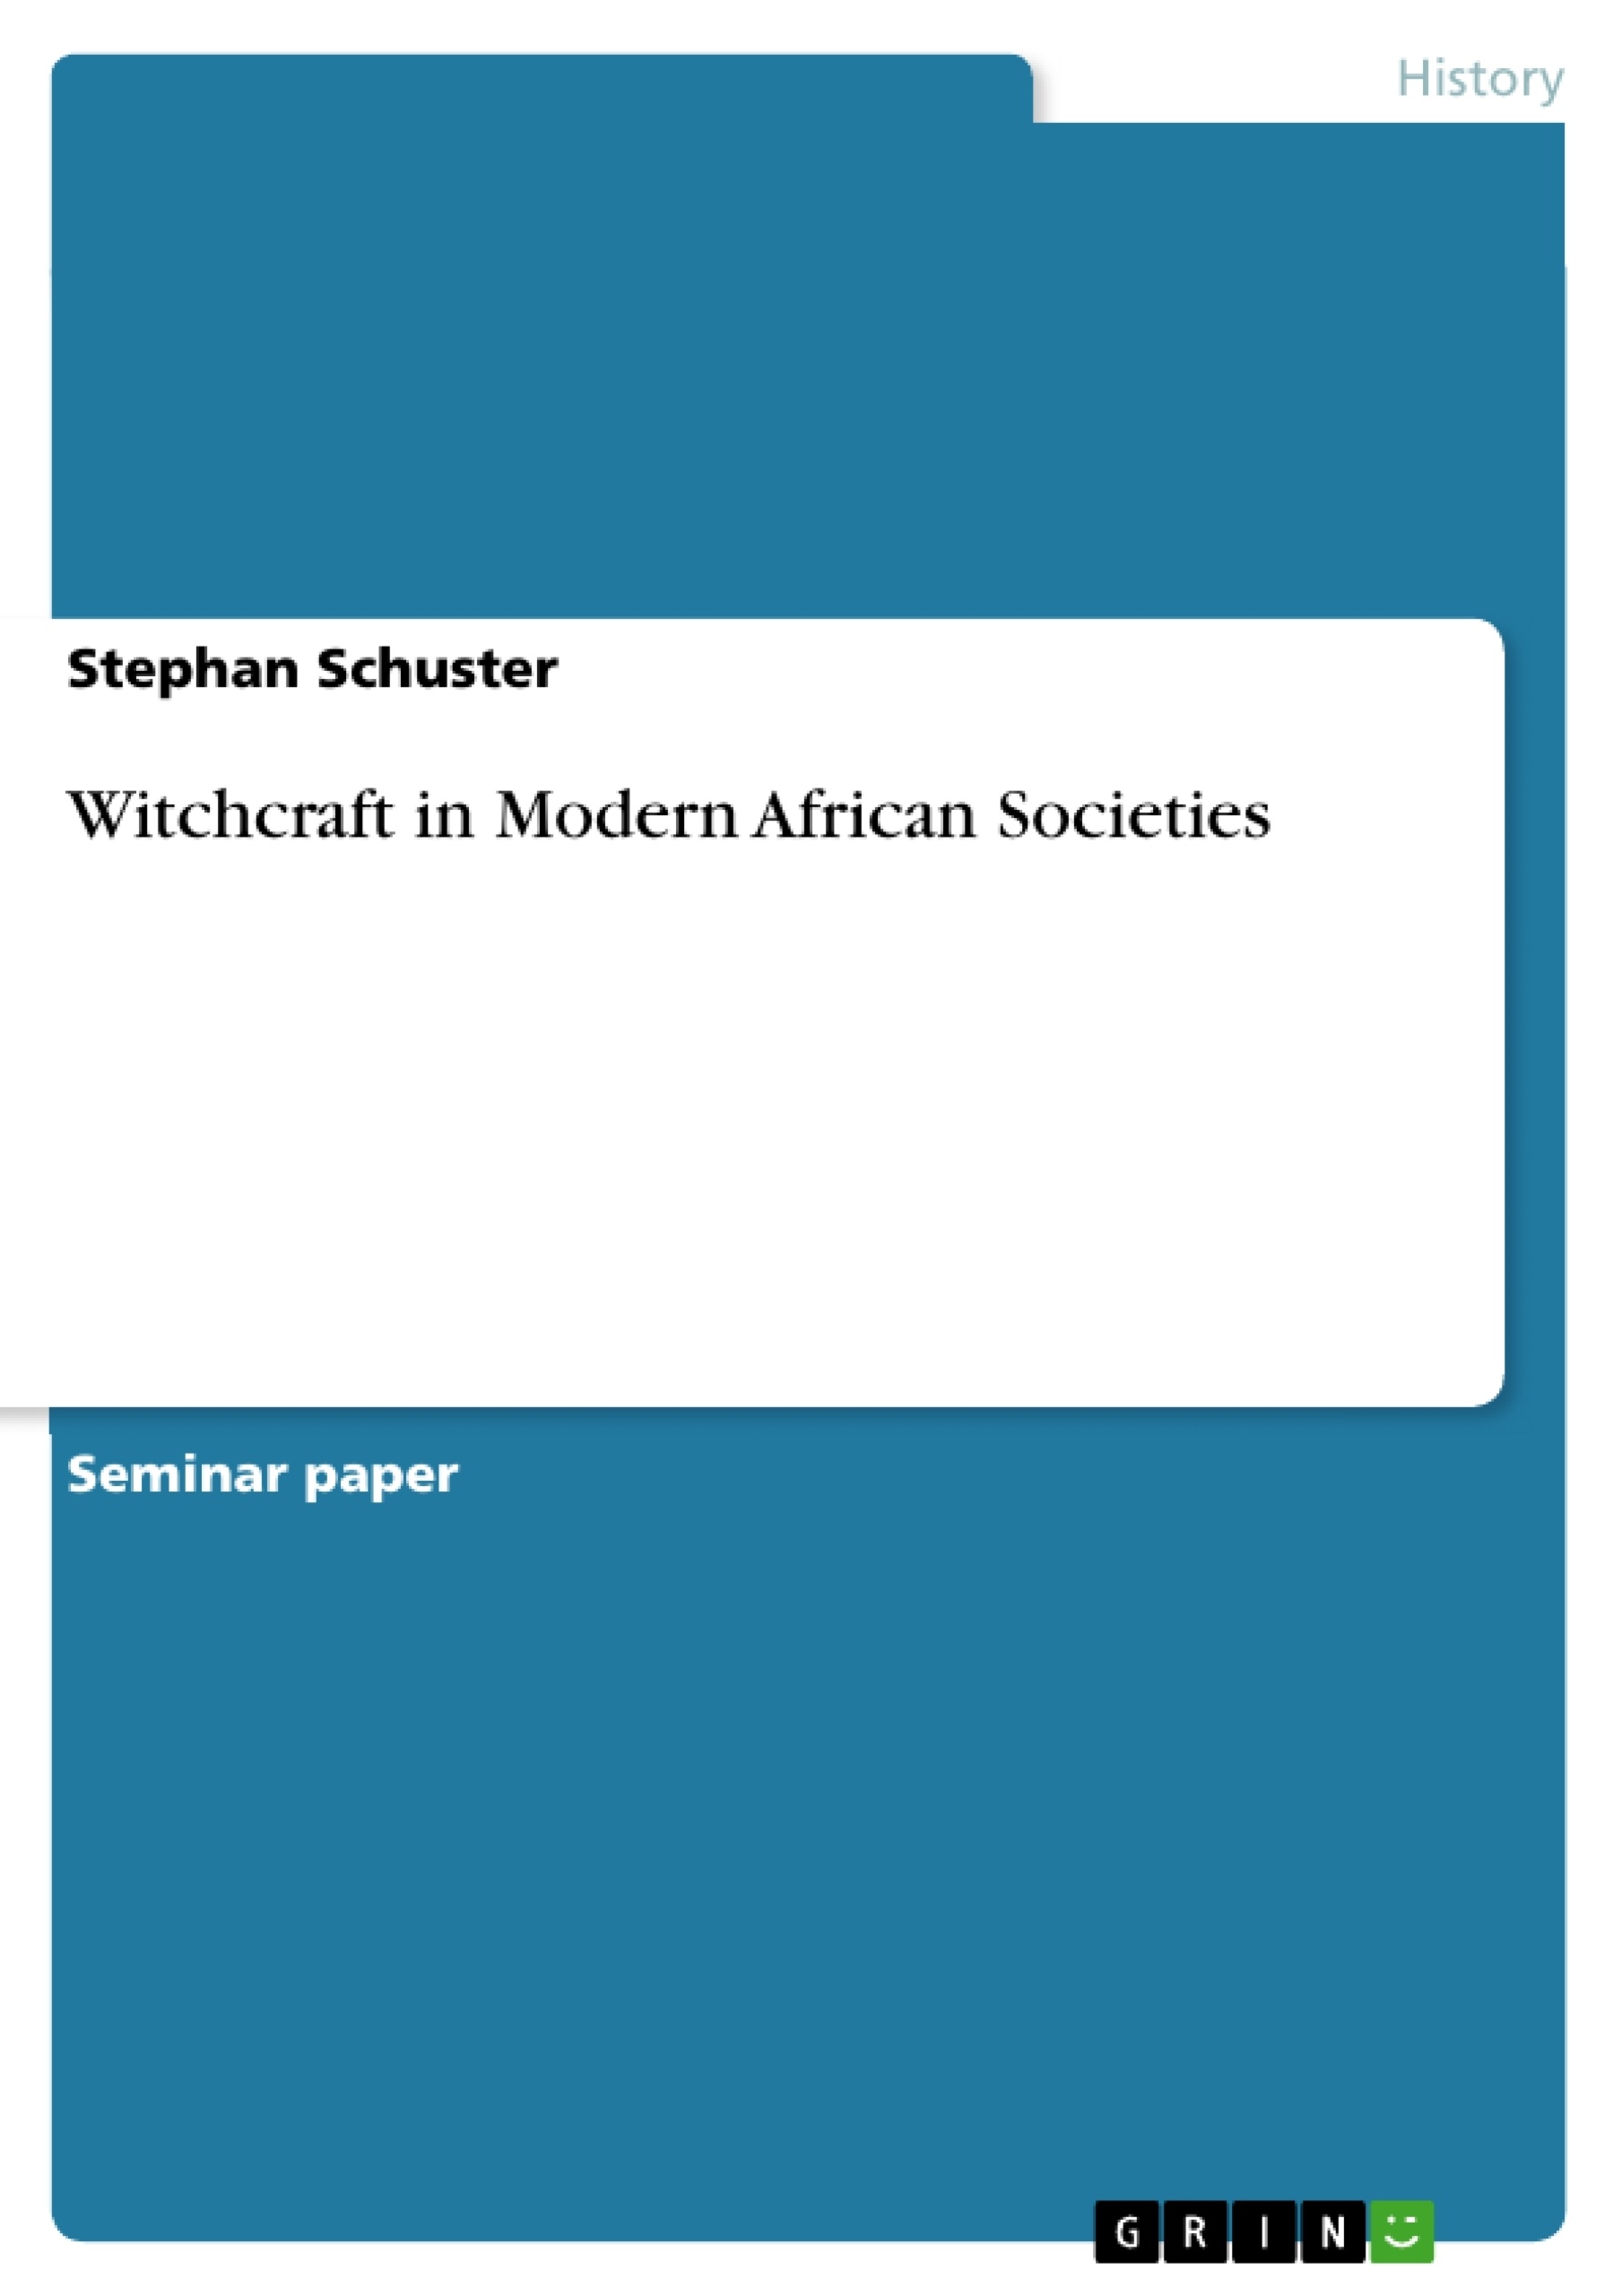 Title: Witchcraft in Modern African Societies